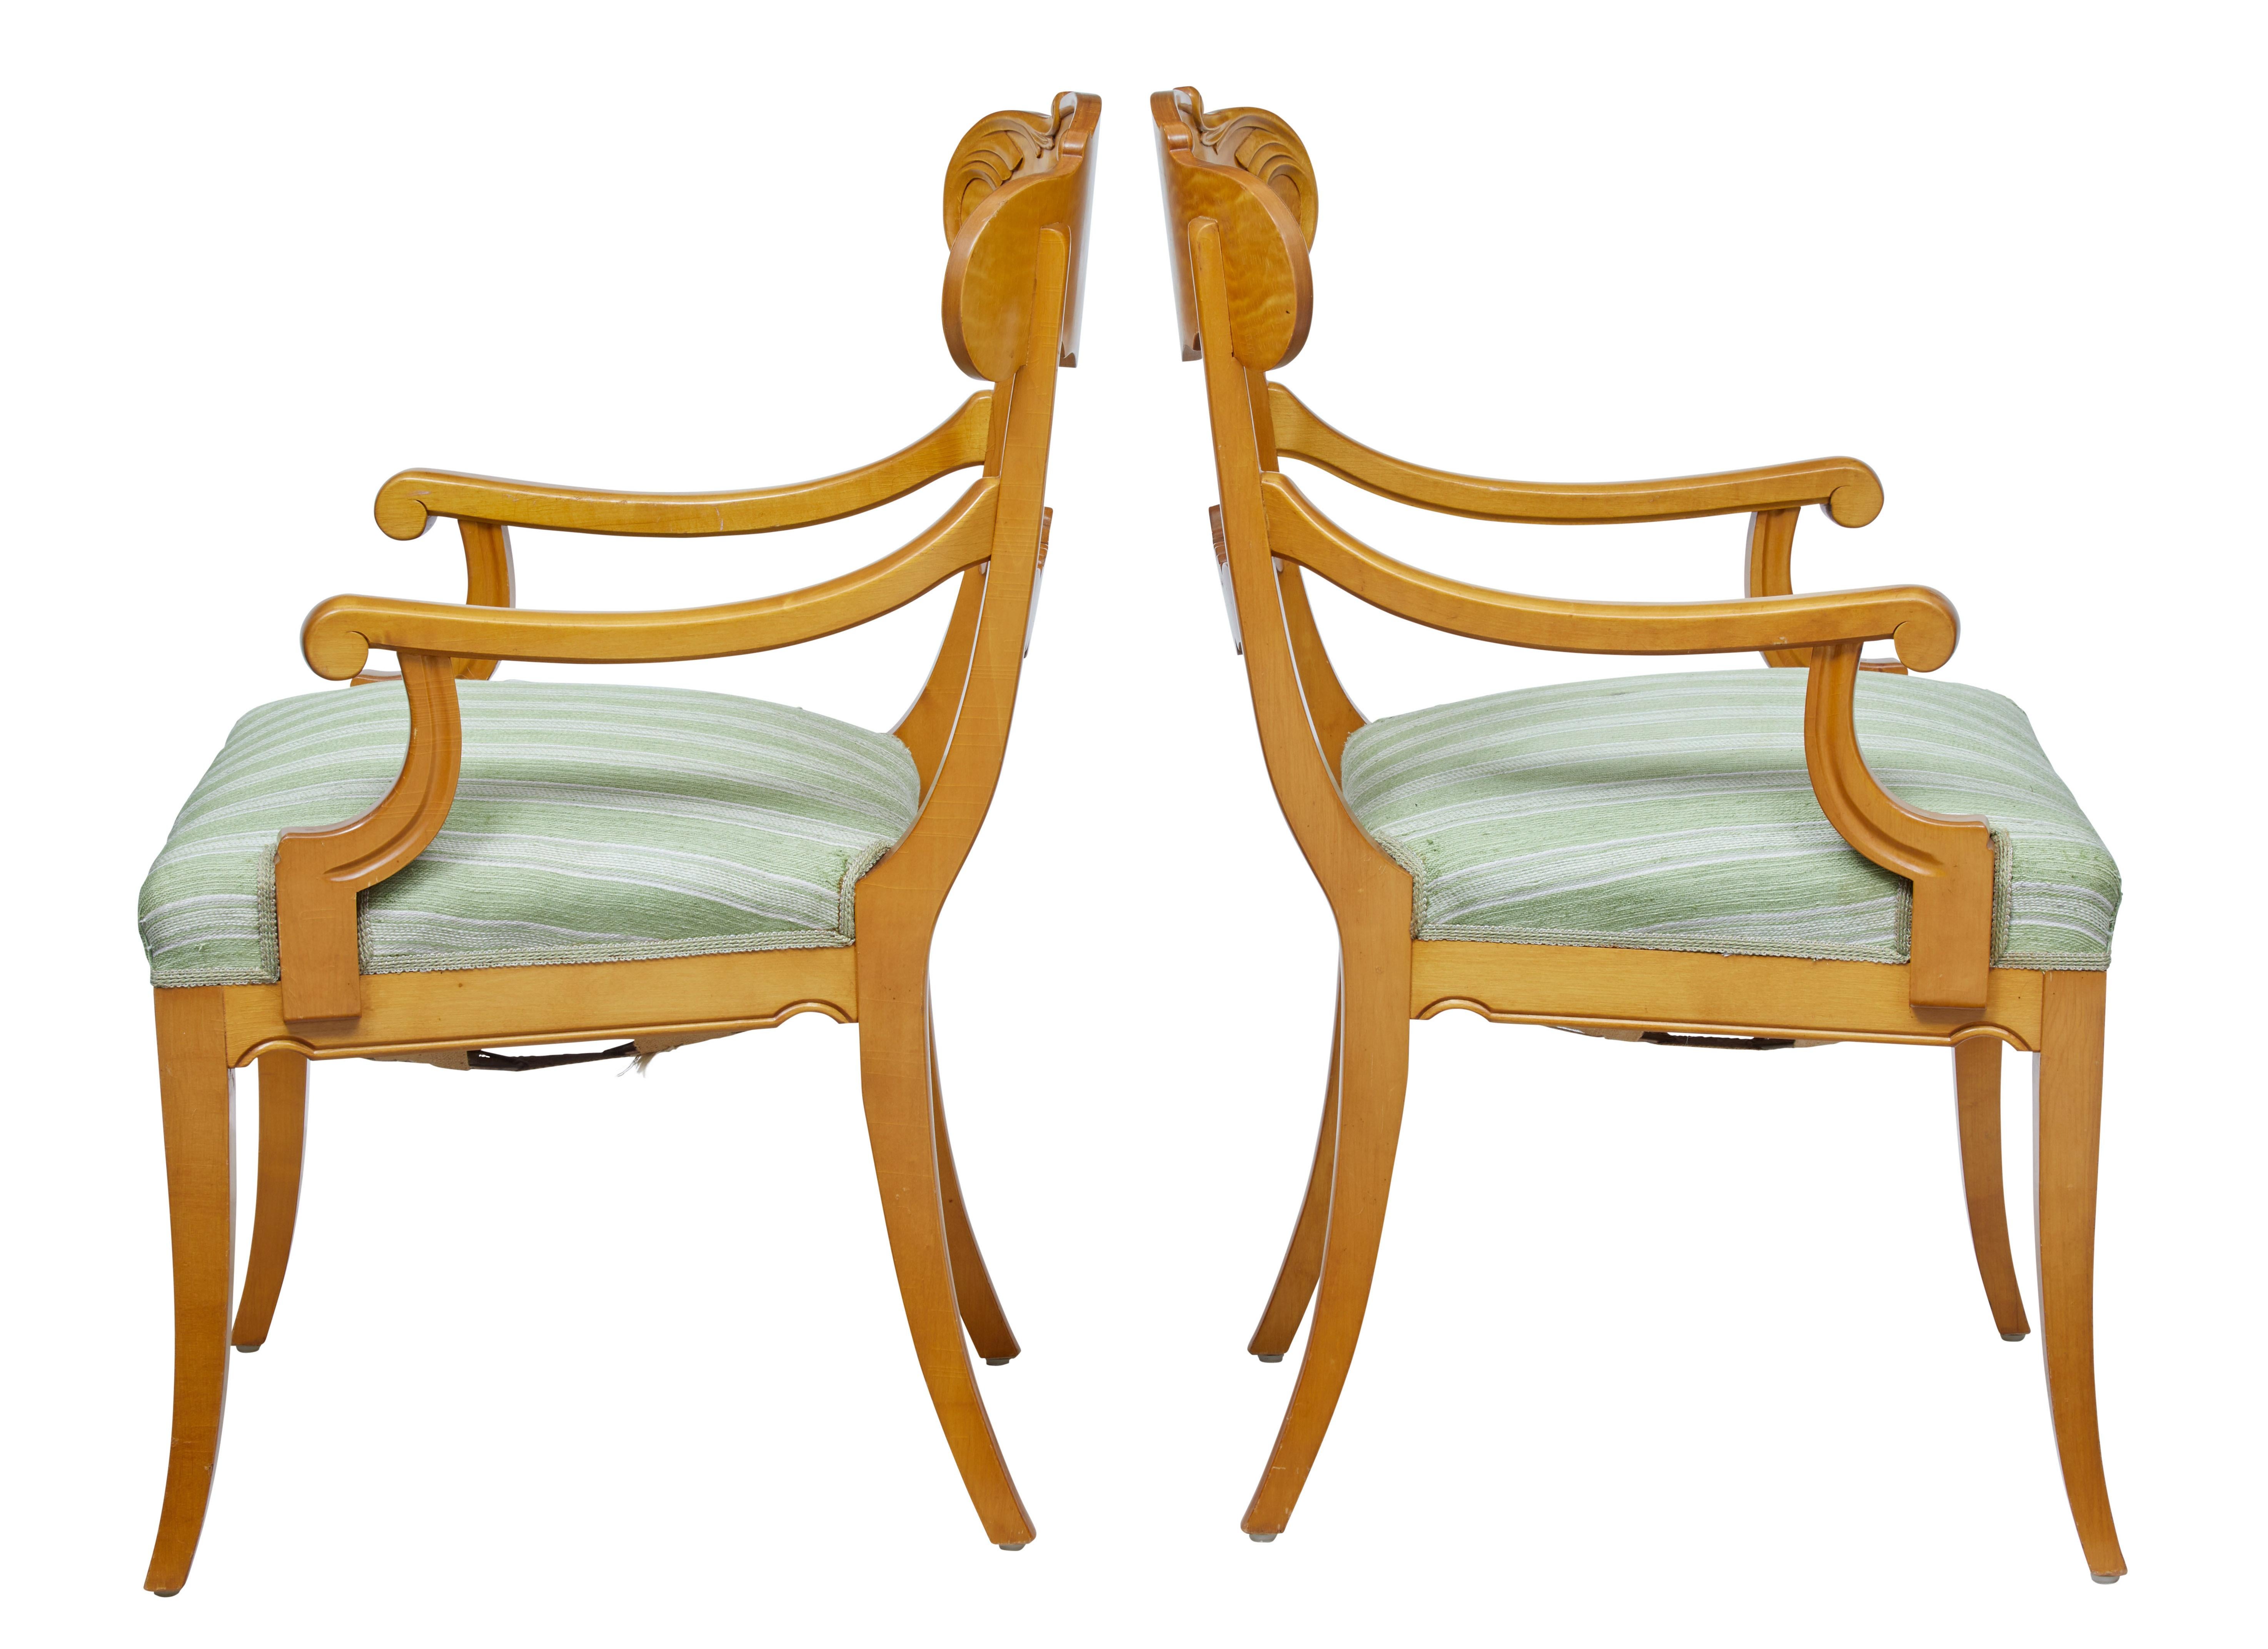 Pair of early 20th Swedish carved birch armchairs, circa 1920.

Good quality pair of birch armchairs in the Karl Johan taste.

Shaped and carved backrest, flowing to the scrolling arms. Standing on sabre legs.

Upholstery with some plucking